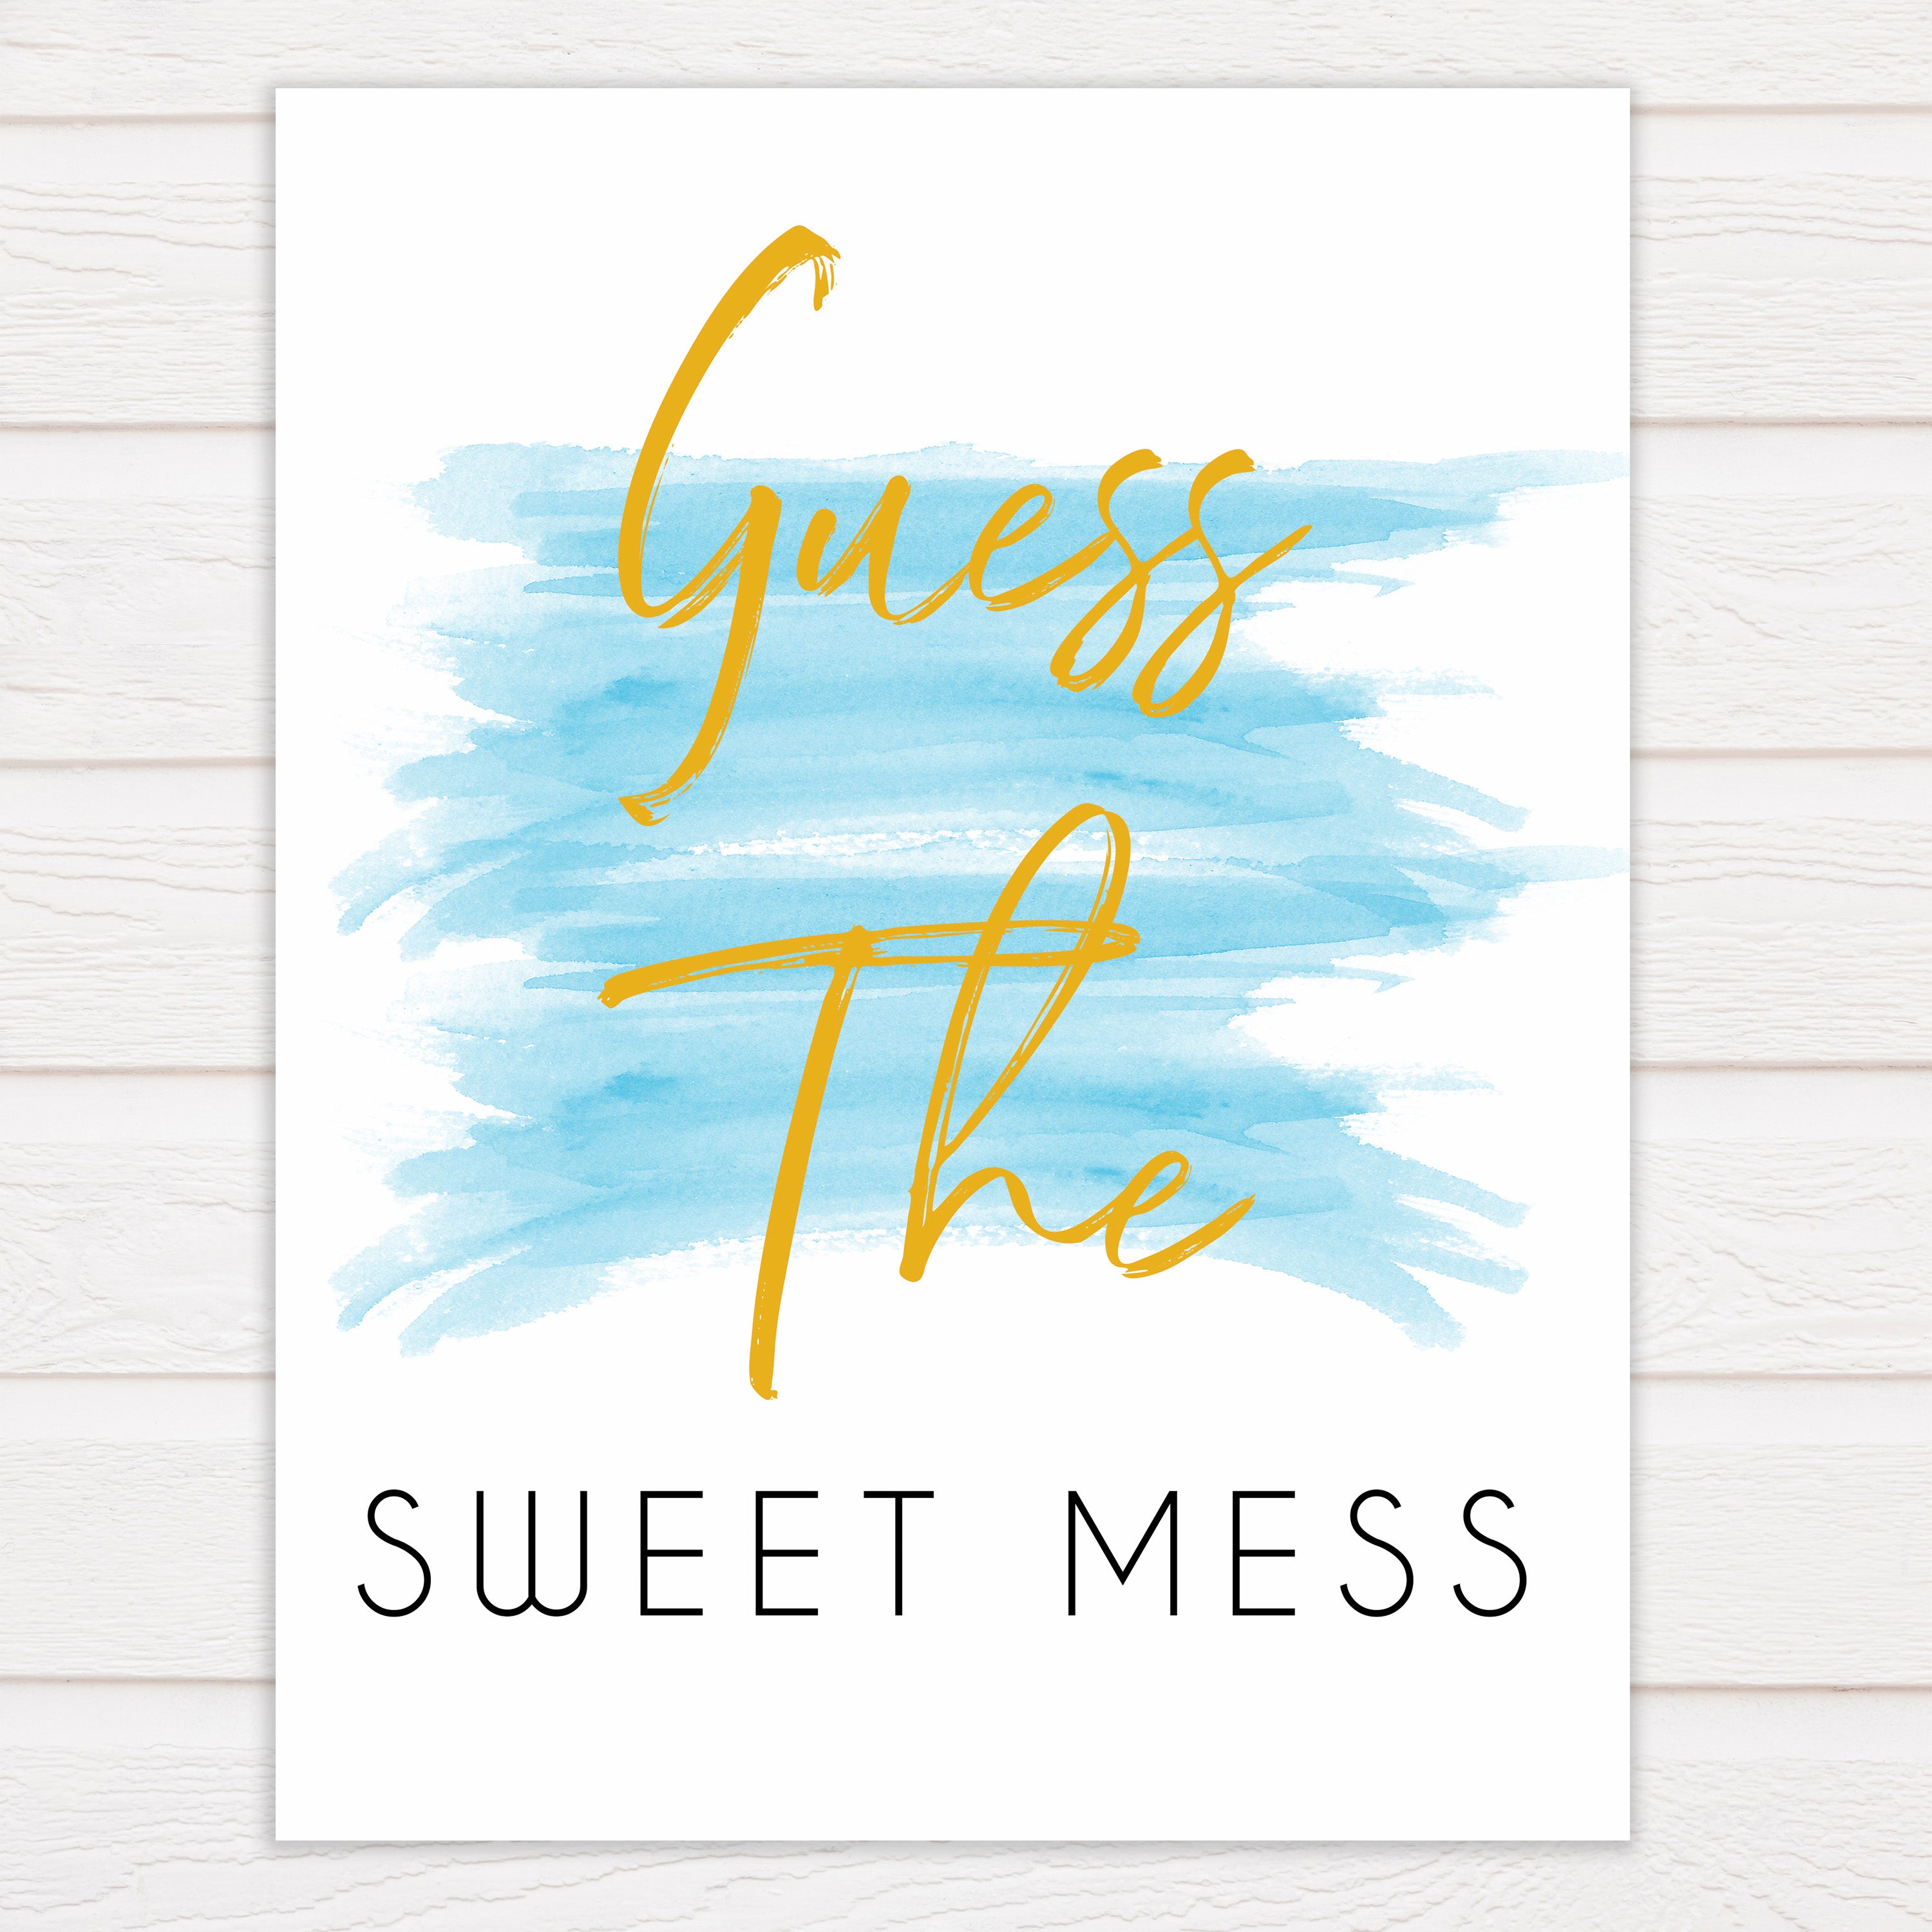 Blue swash, guess the sweet mess baby games, baby shower games, printable baby games, fun baby games, boy baby shower games, baby games, fun baby shower ideas, baby shower ideas, boy baby games, blue baby shower